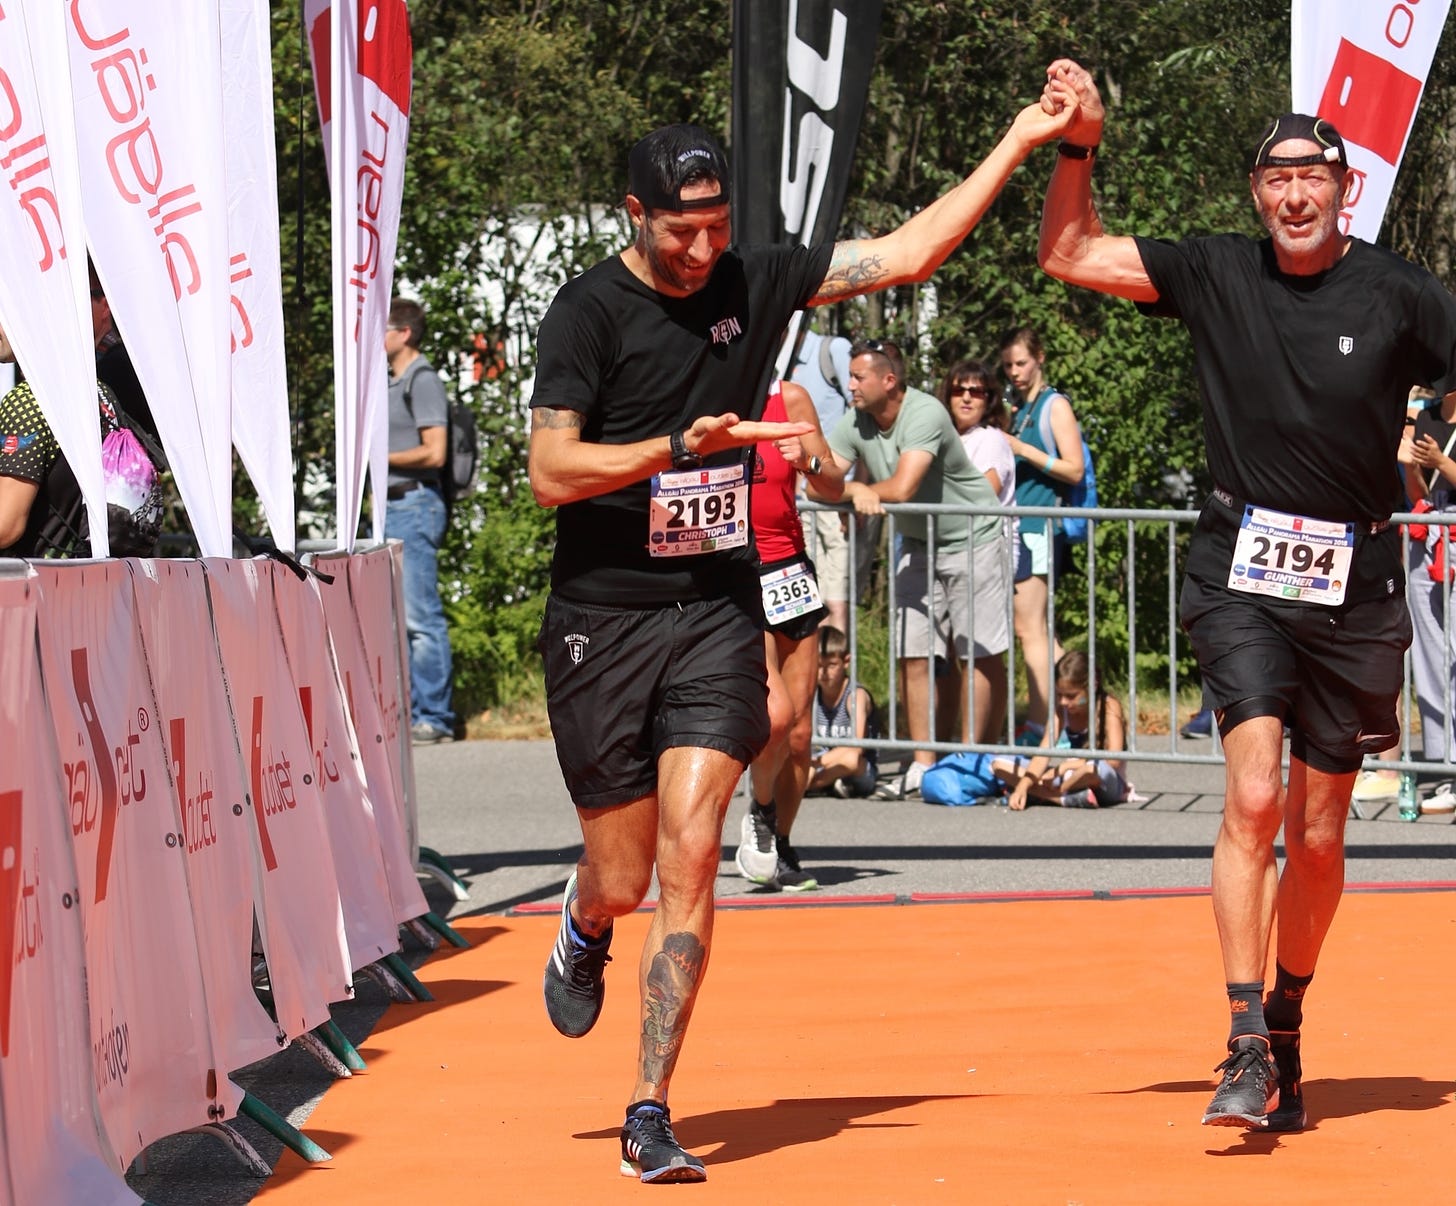 The author and his father crossing the finish line hand in hand at the Allgäu Panorama Marathon